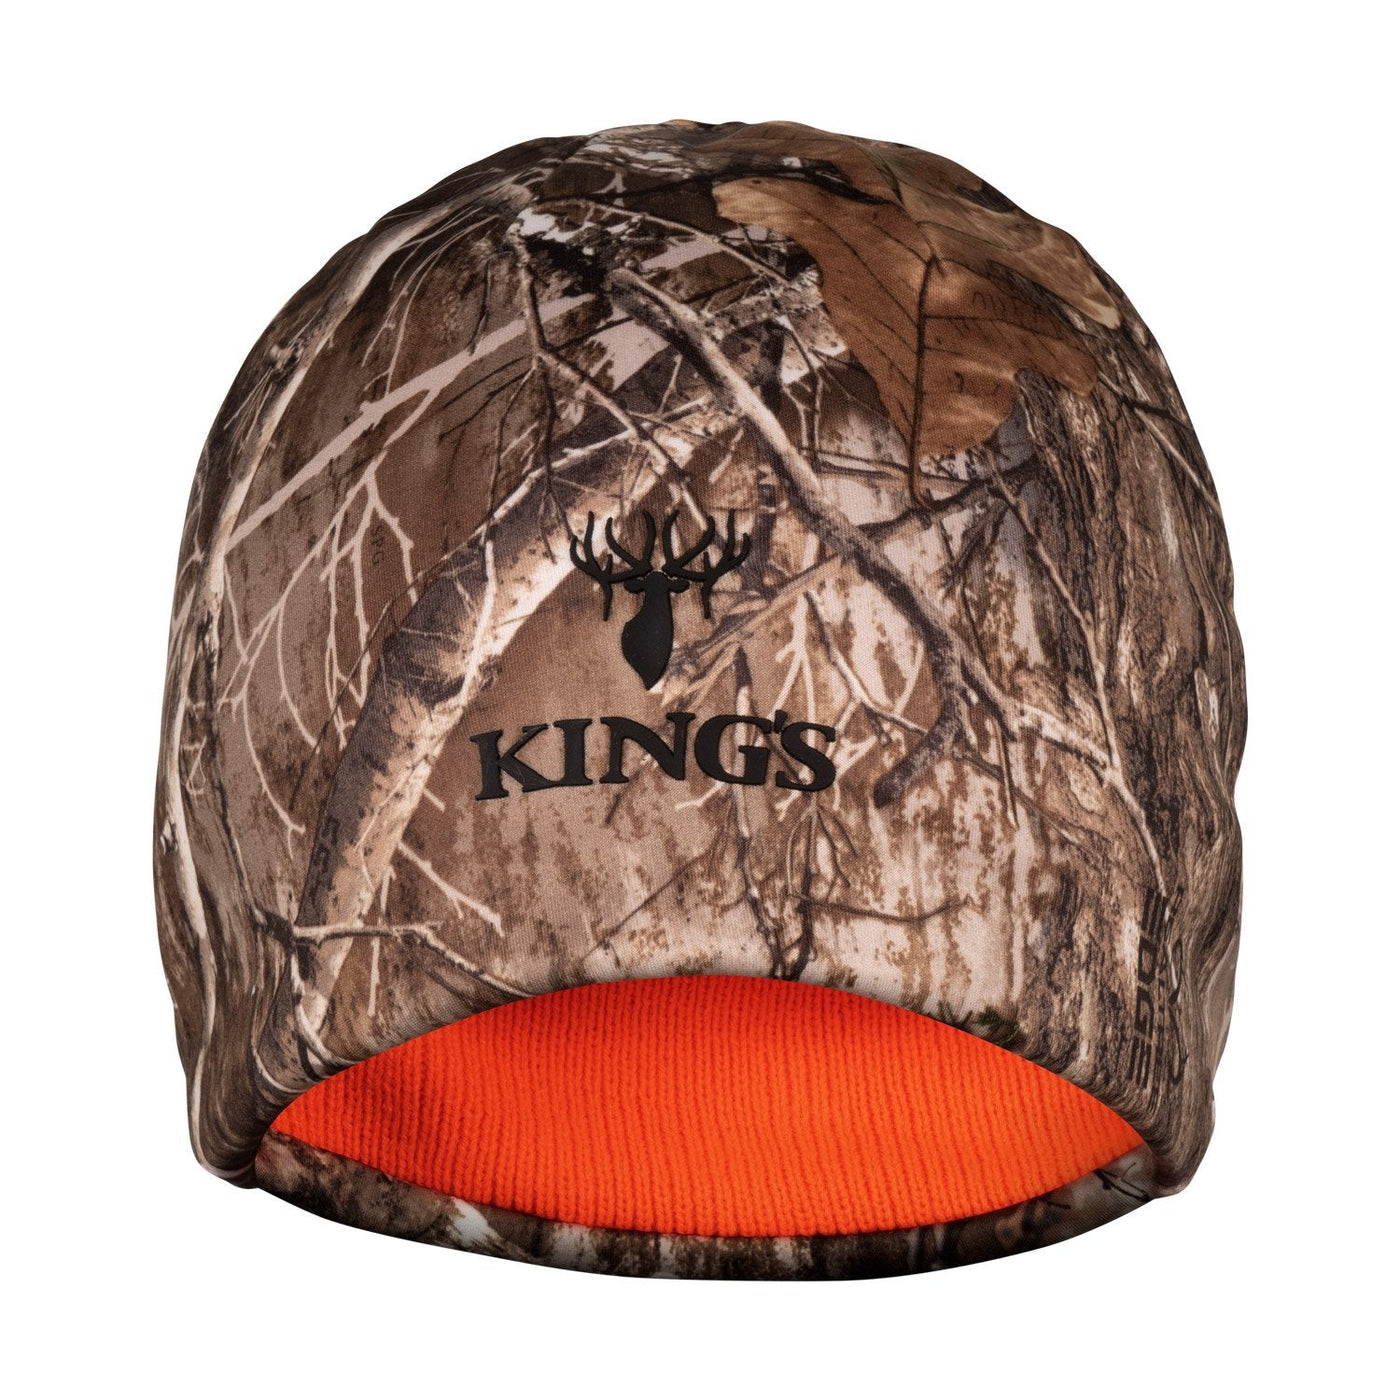 Reversible Poly Beanie in Realtree Edge | Corbotras lochi